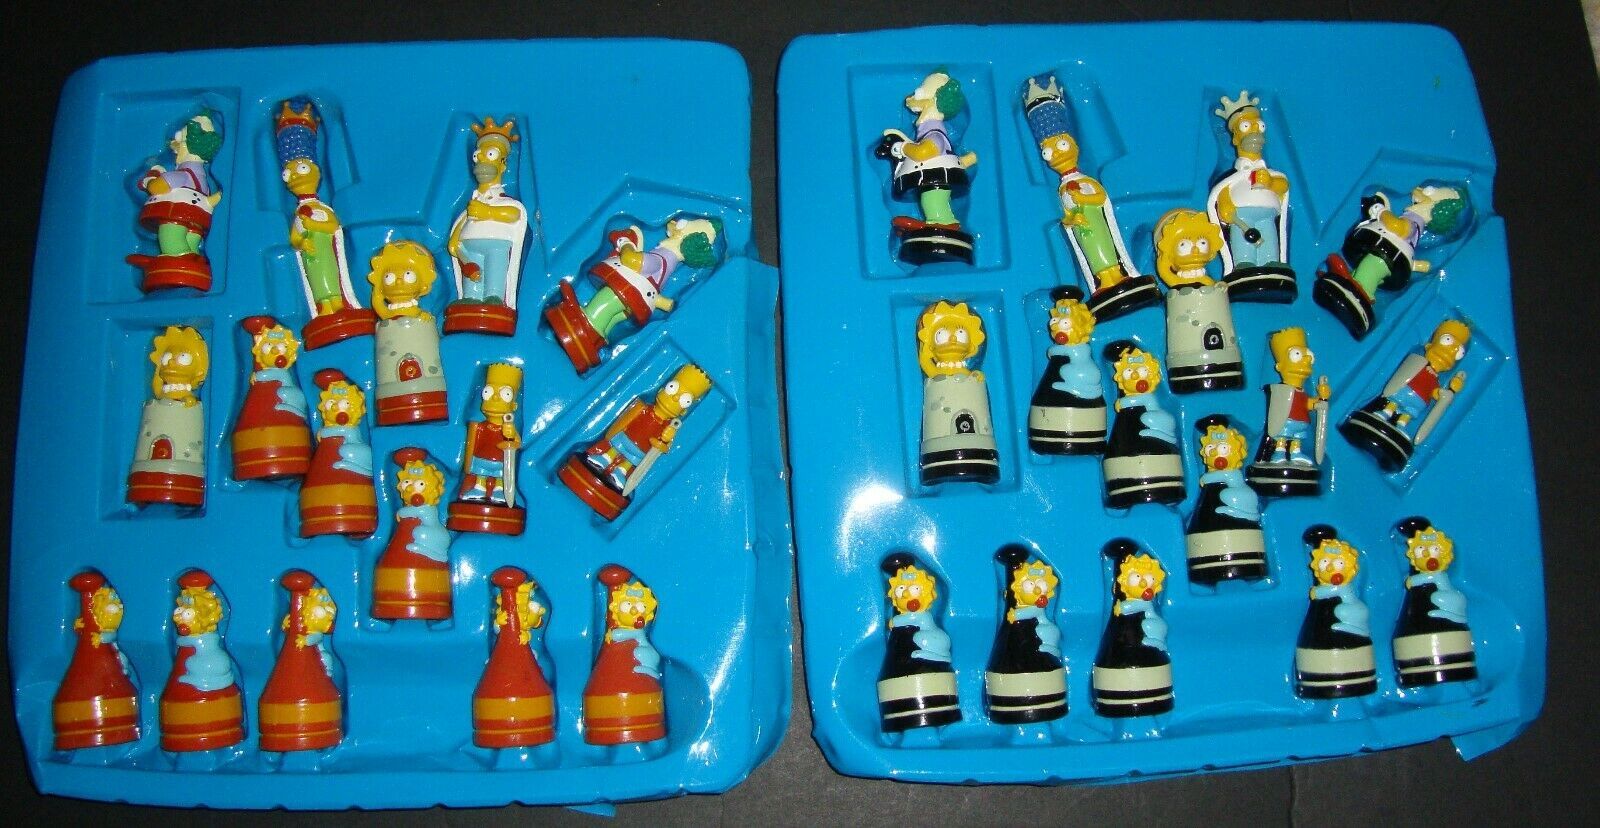 DO YOU NEED A REPLACEMENT PIECE THE SIMPSONS 3D CHESS SET REPLACEMENT PIECES 